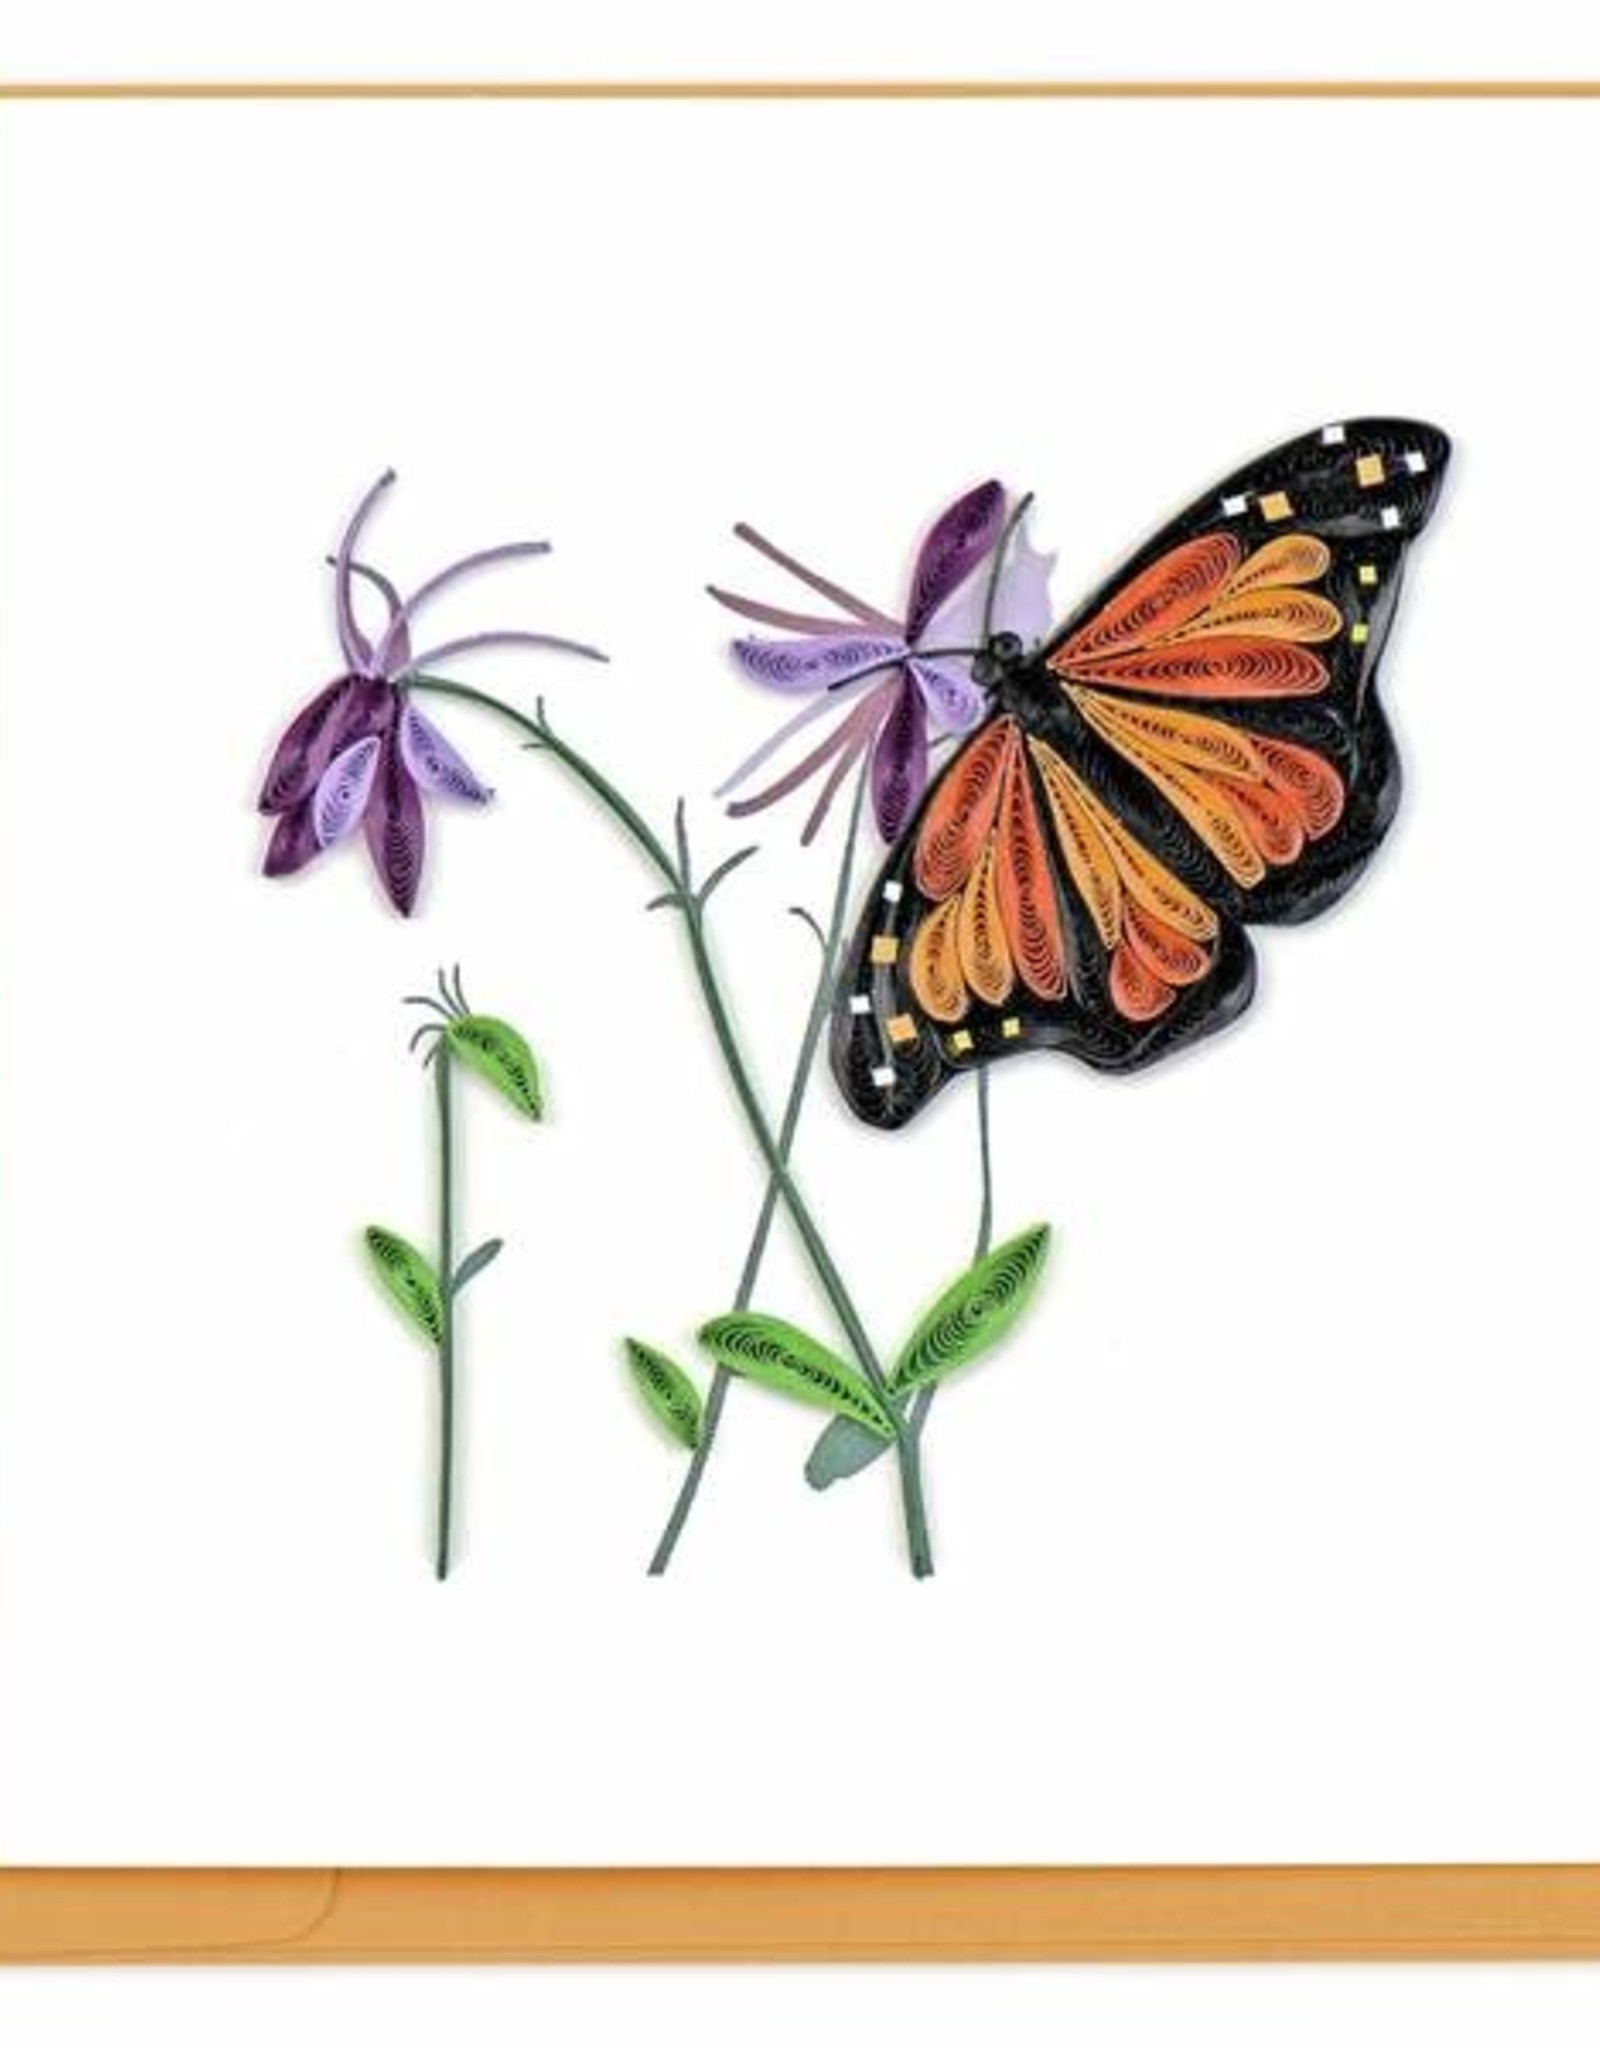 Quilling Card Quilled Monarch Butterfly Greeting Card